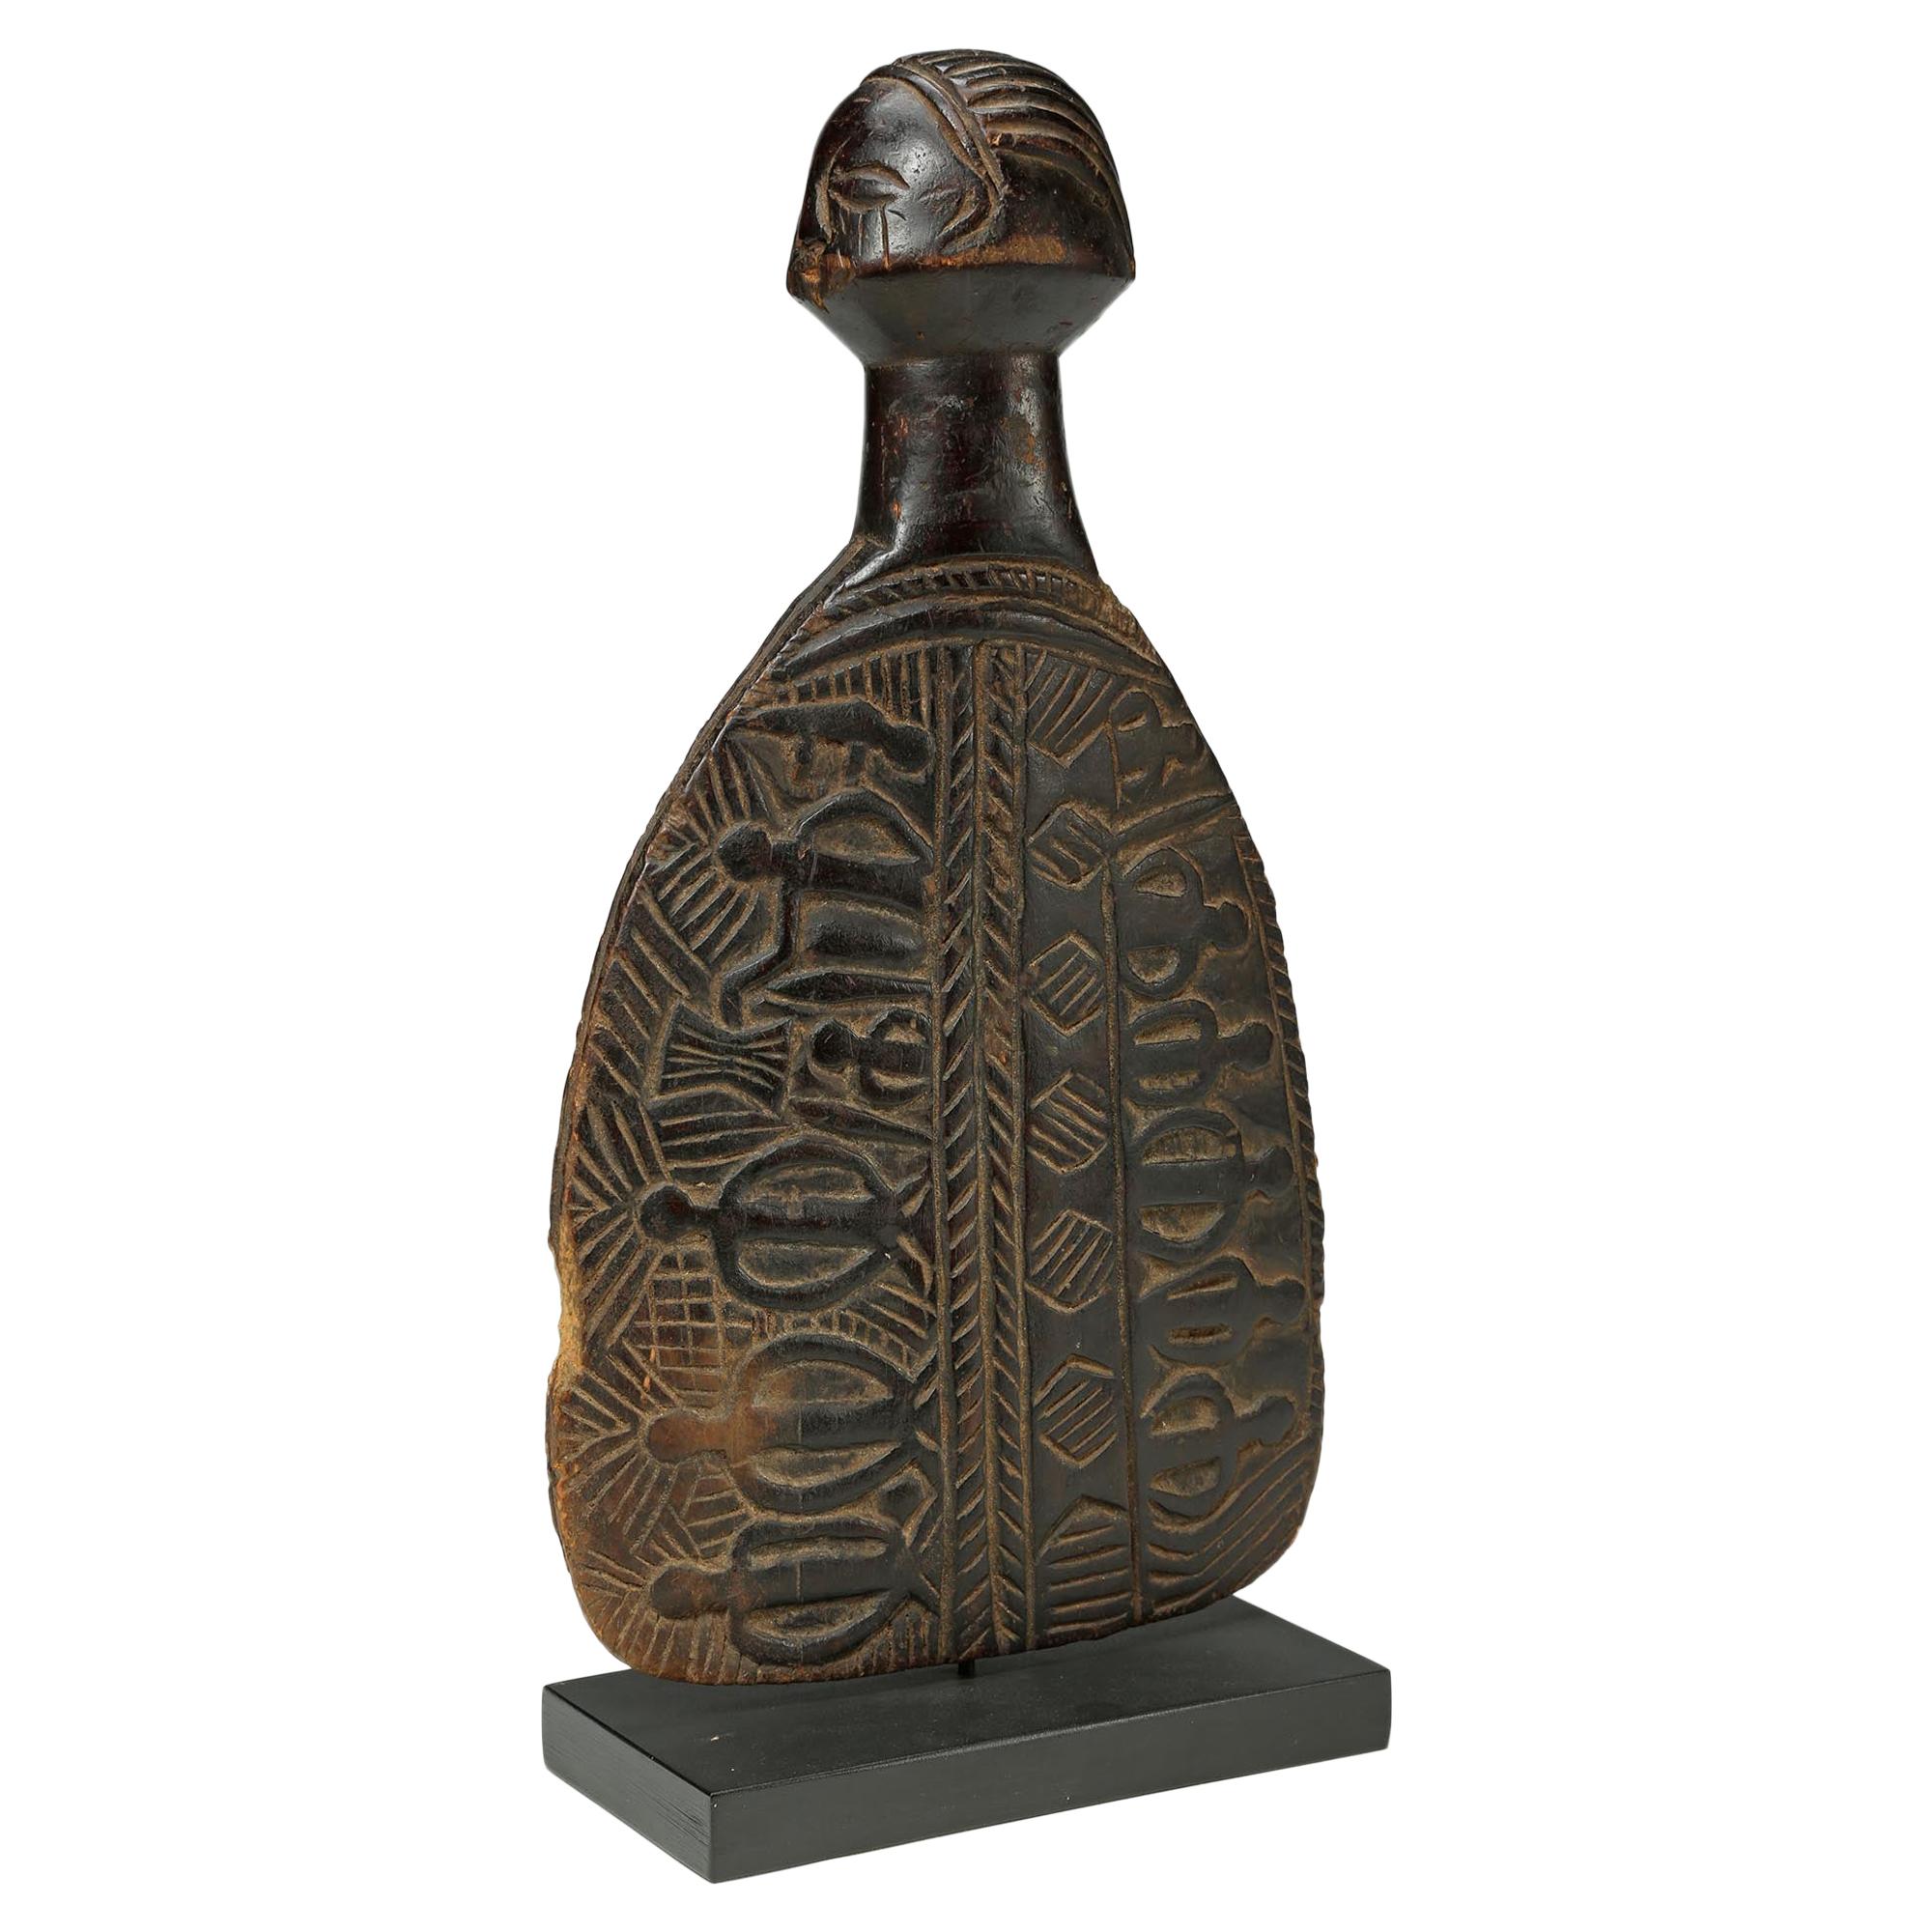 Luba Memory or Story Board with Head Congo Early 20th Century African Tribal Art For Sale